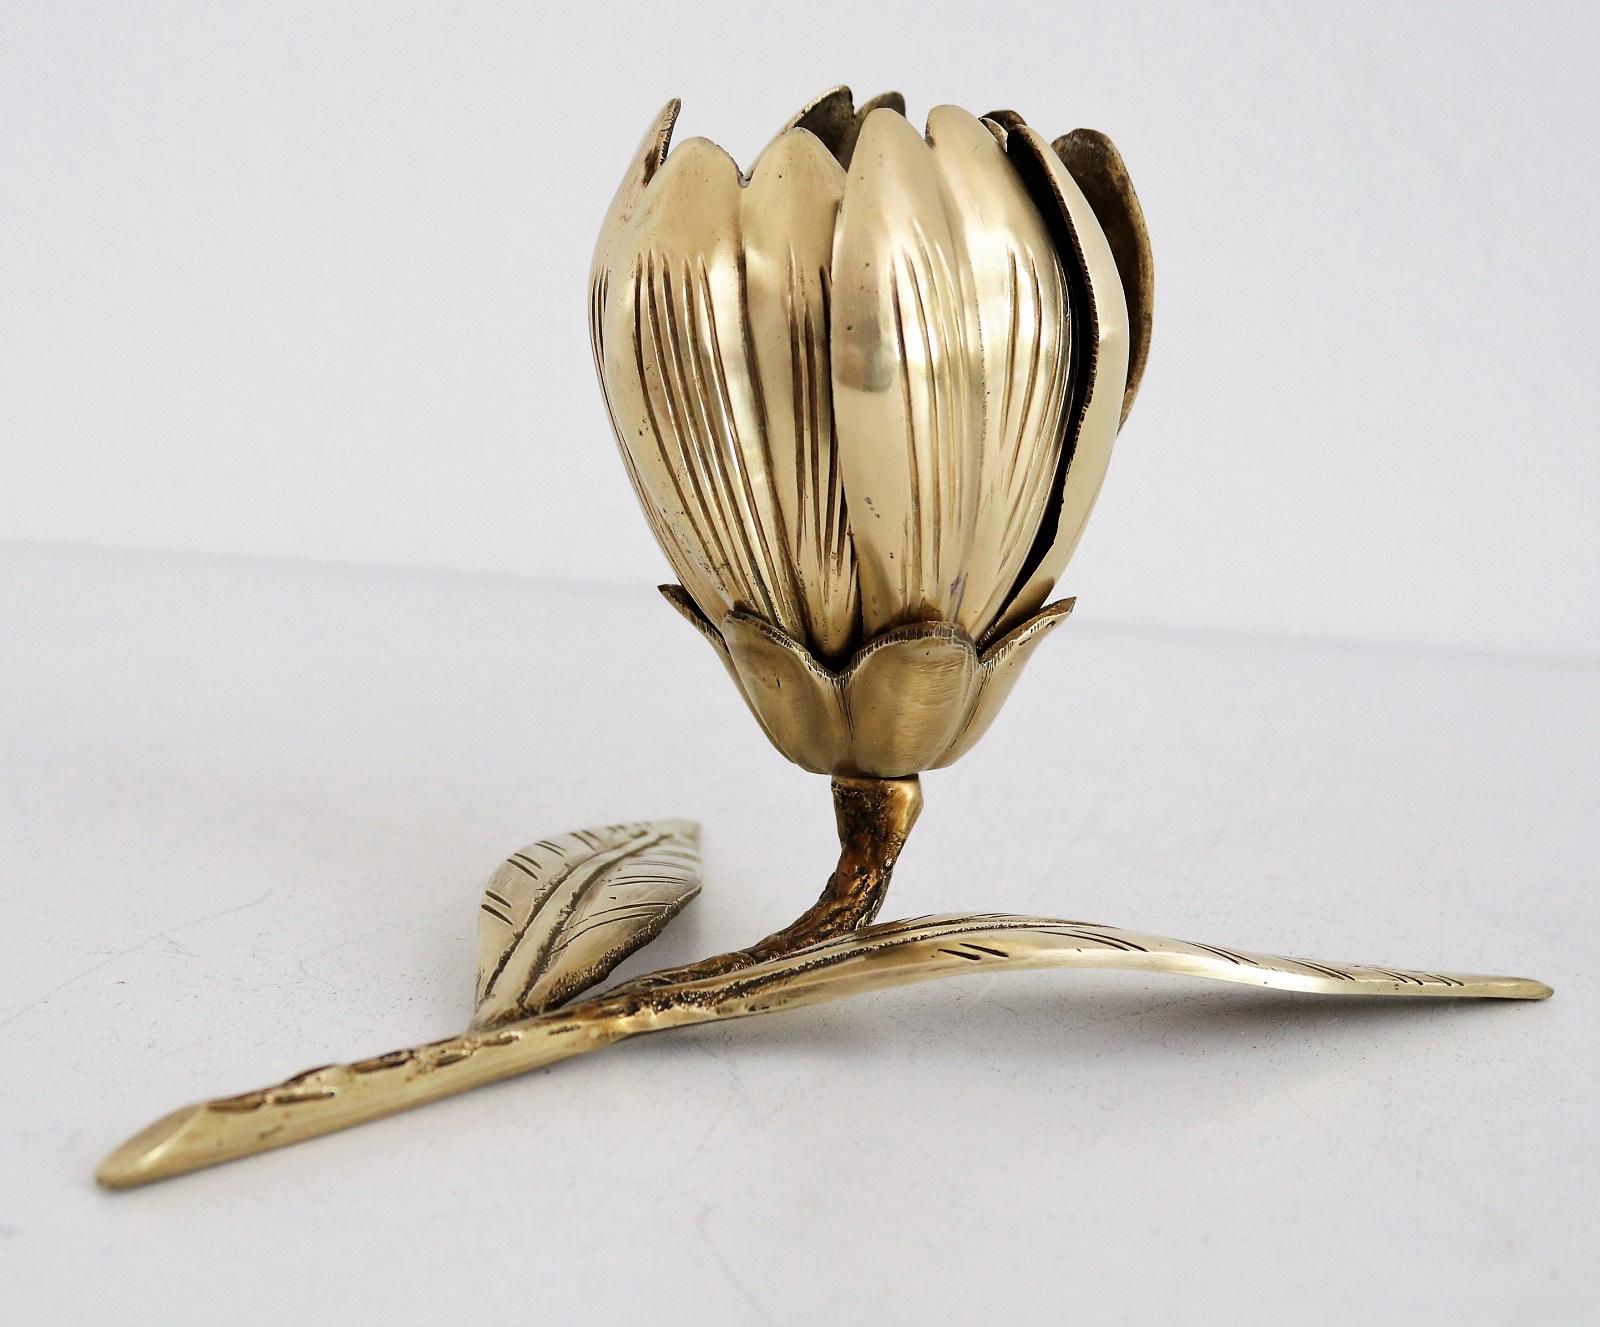 Italian Midcentury Flower in Brass with Petal Ashtrays for Cigarettes, 1950s 9